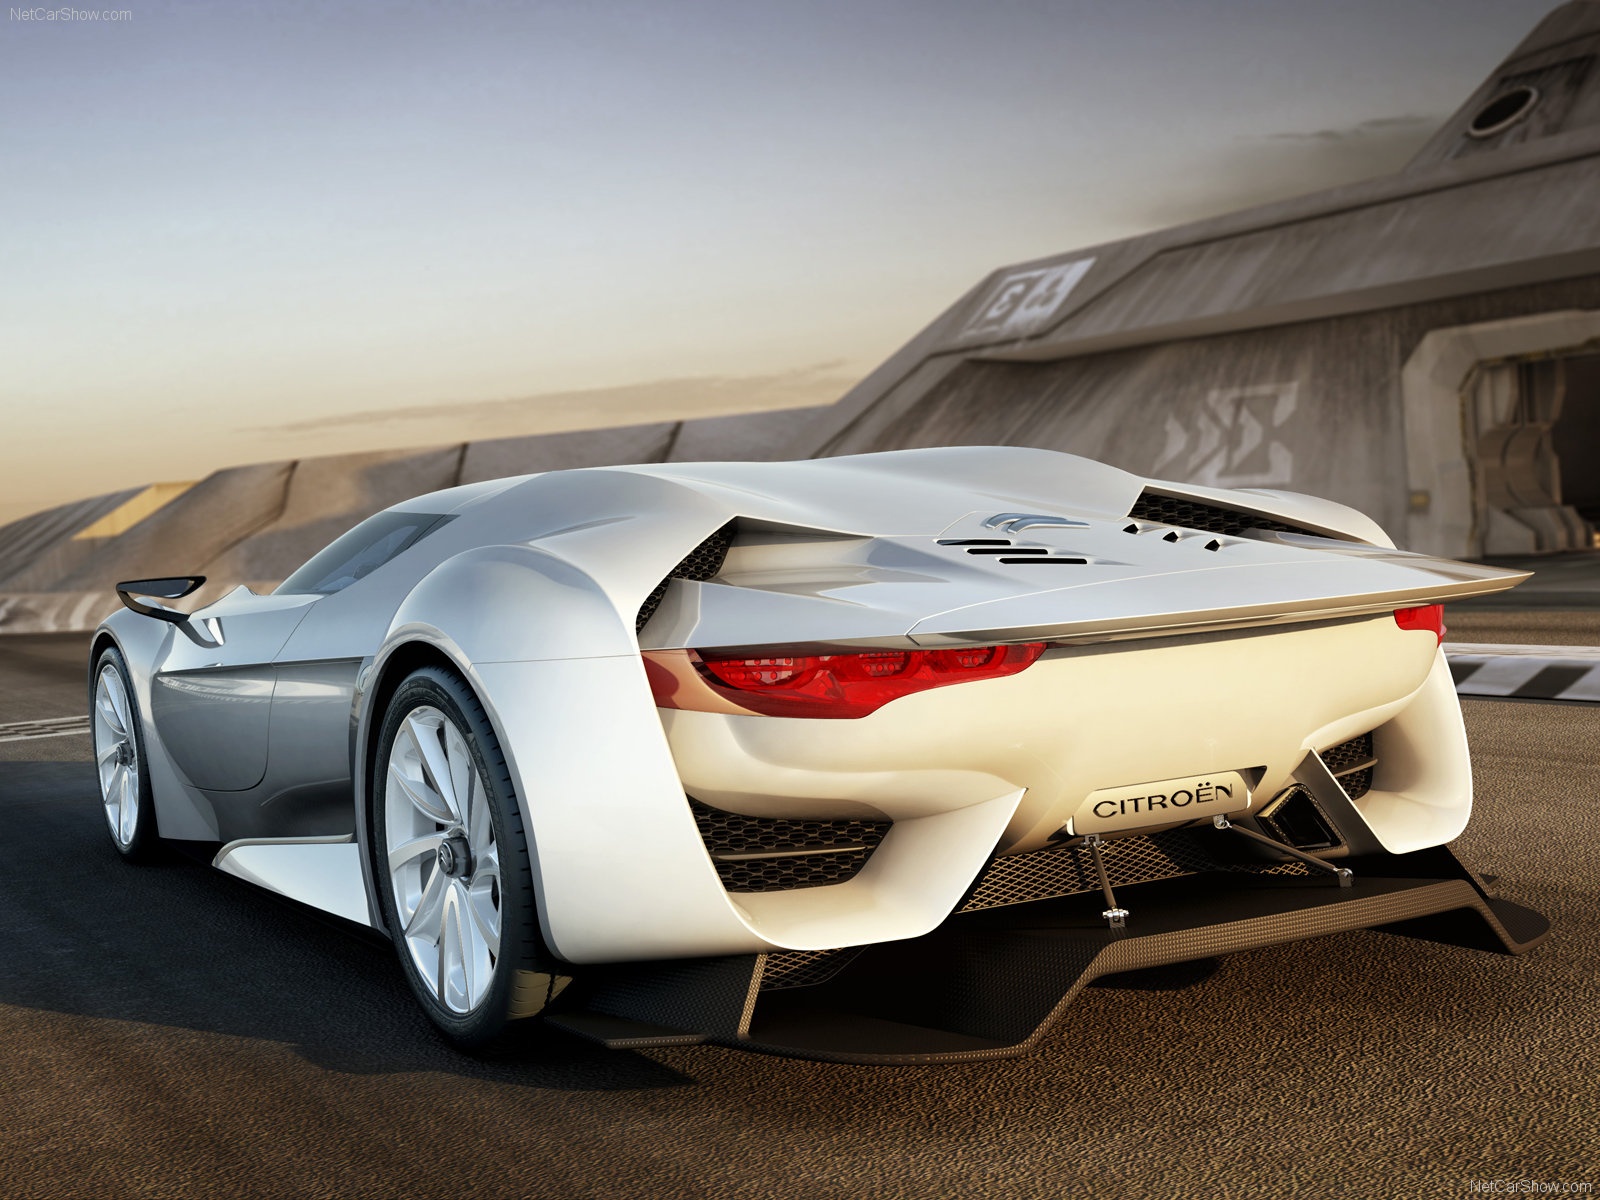 Awesome Car Backgrounds - Citroen Gran Turismo 5 , HD Wallpaper & Backgrounds